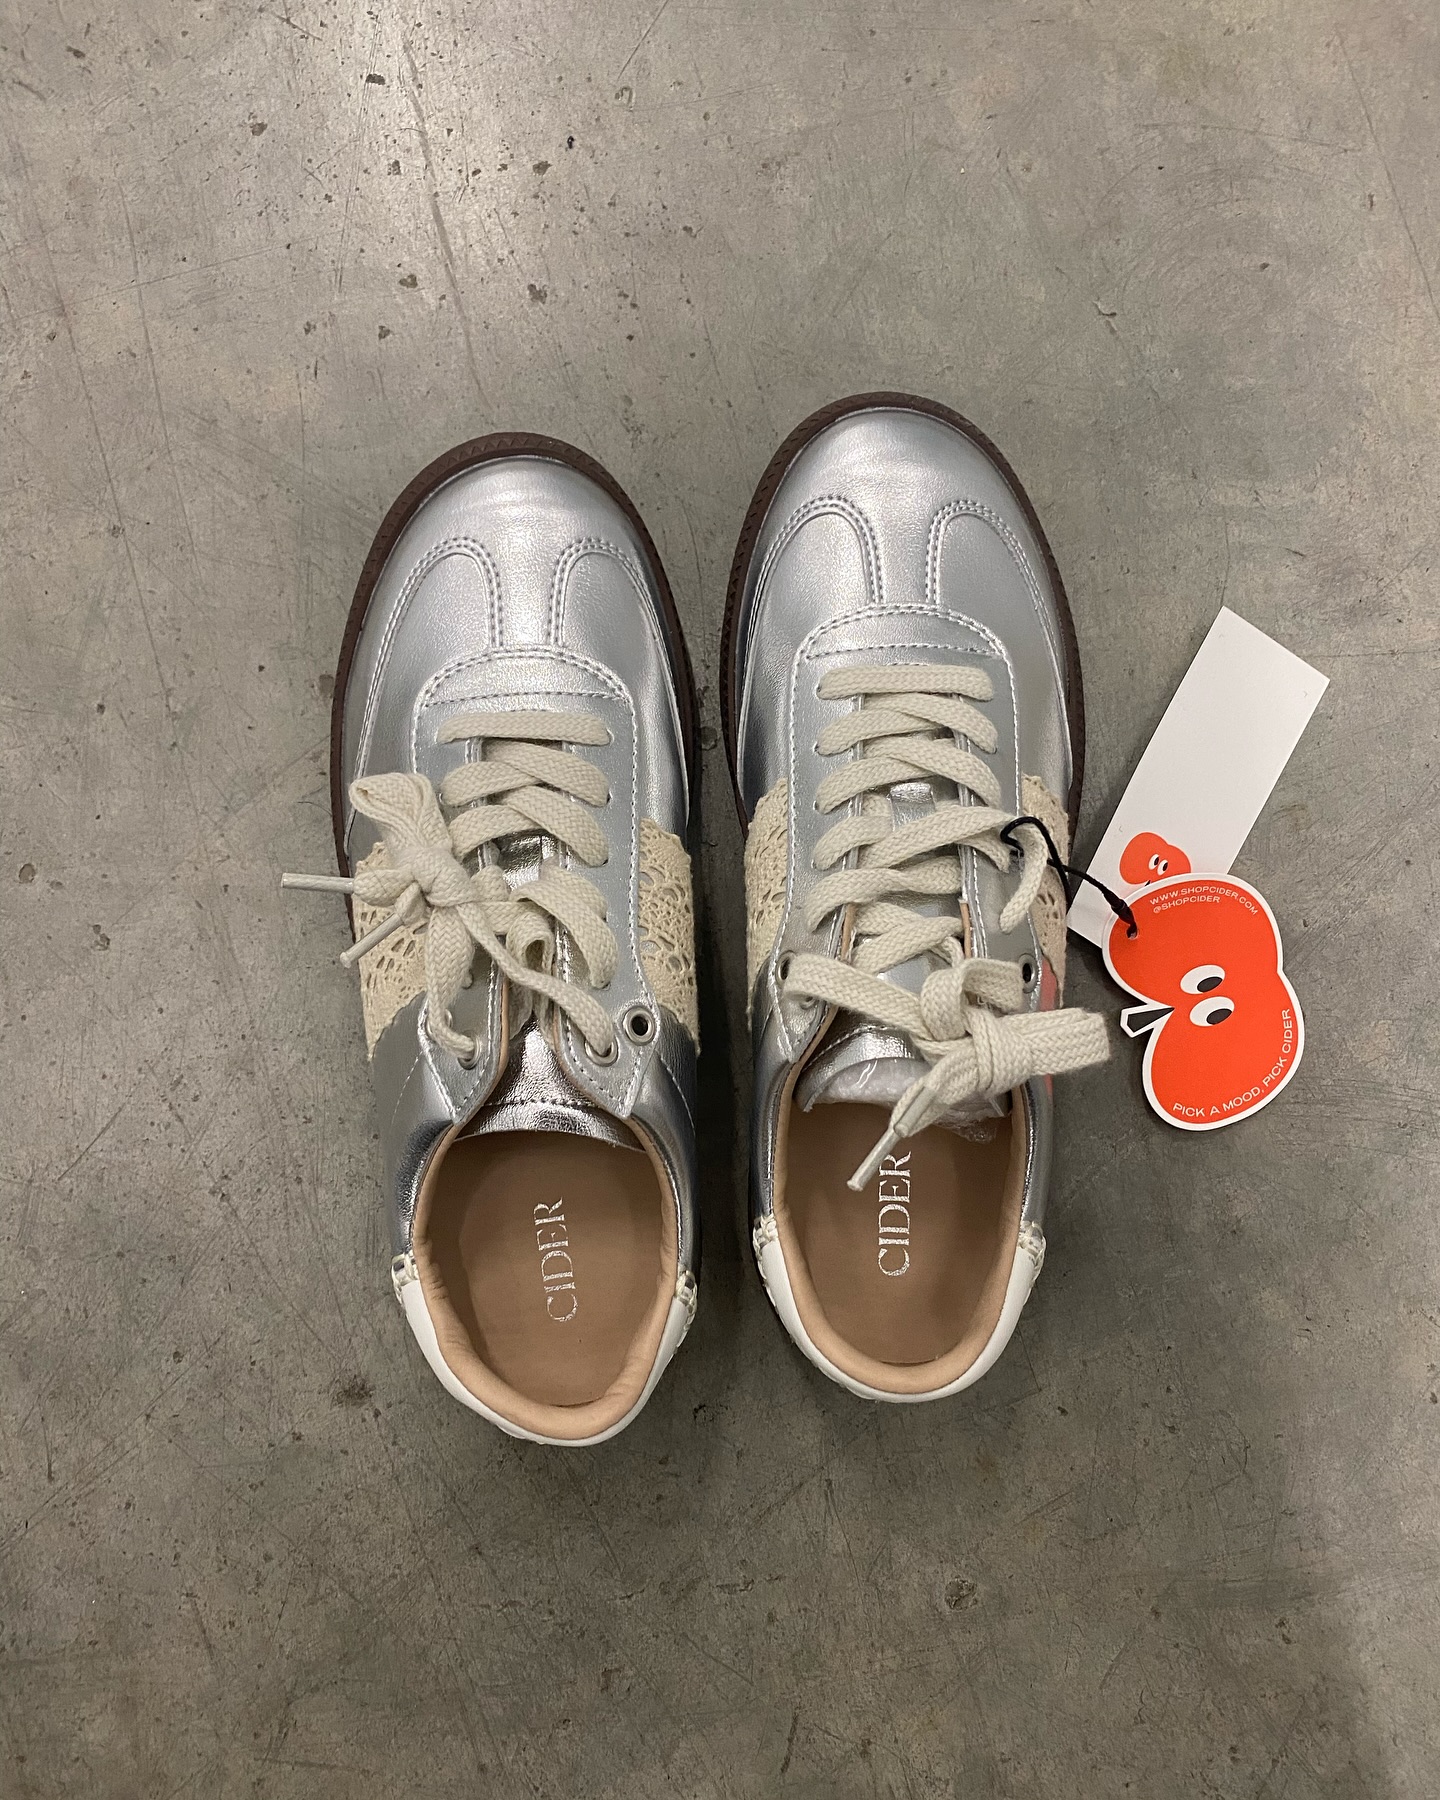 Brand new cider sneakers , size 8
20$